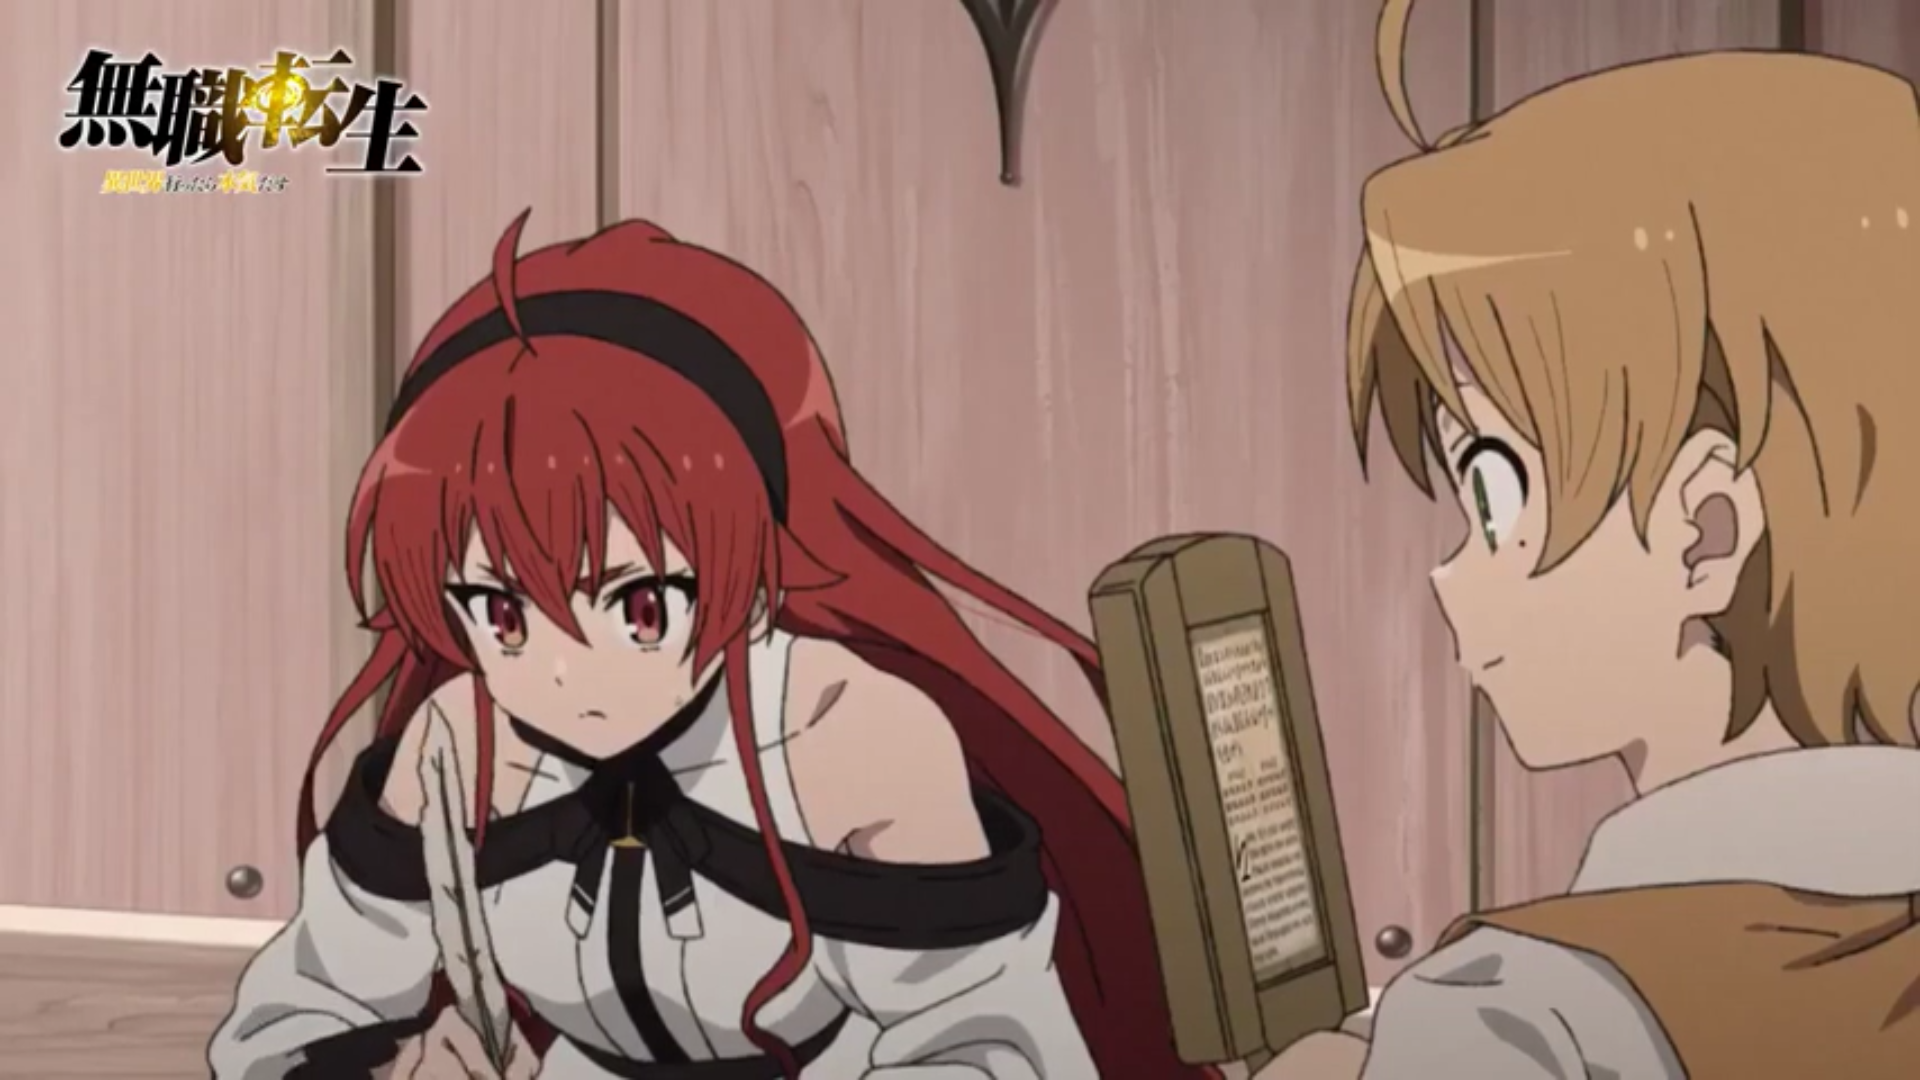 Mushoku Tensei Anime Episode 7 Release Date, Release Time, Where To Watch English Sub Online, Countdown, News and Everything You Need to Know for Jobless Reincarnation